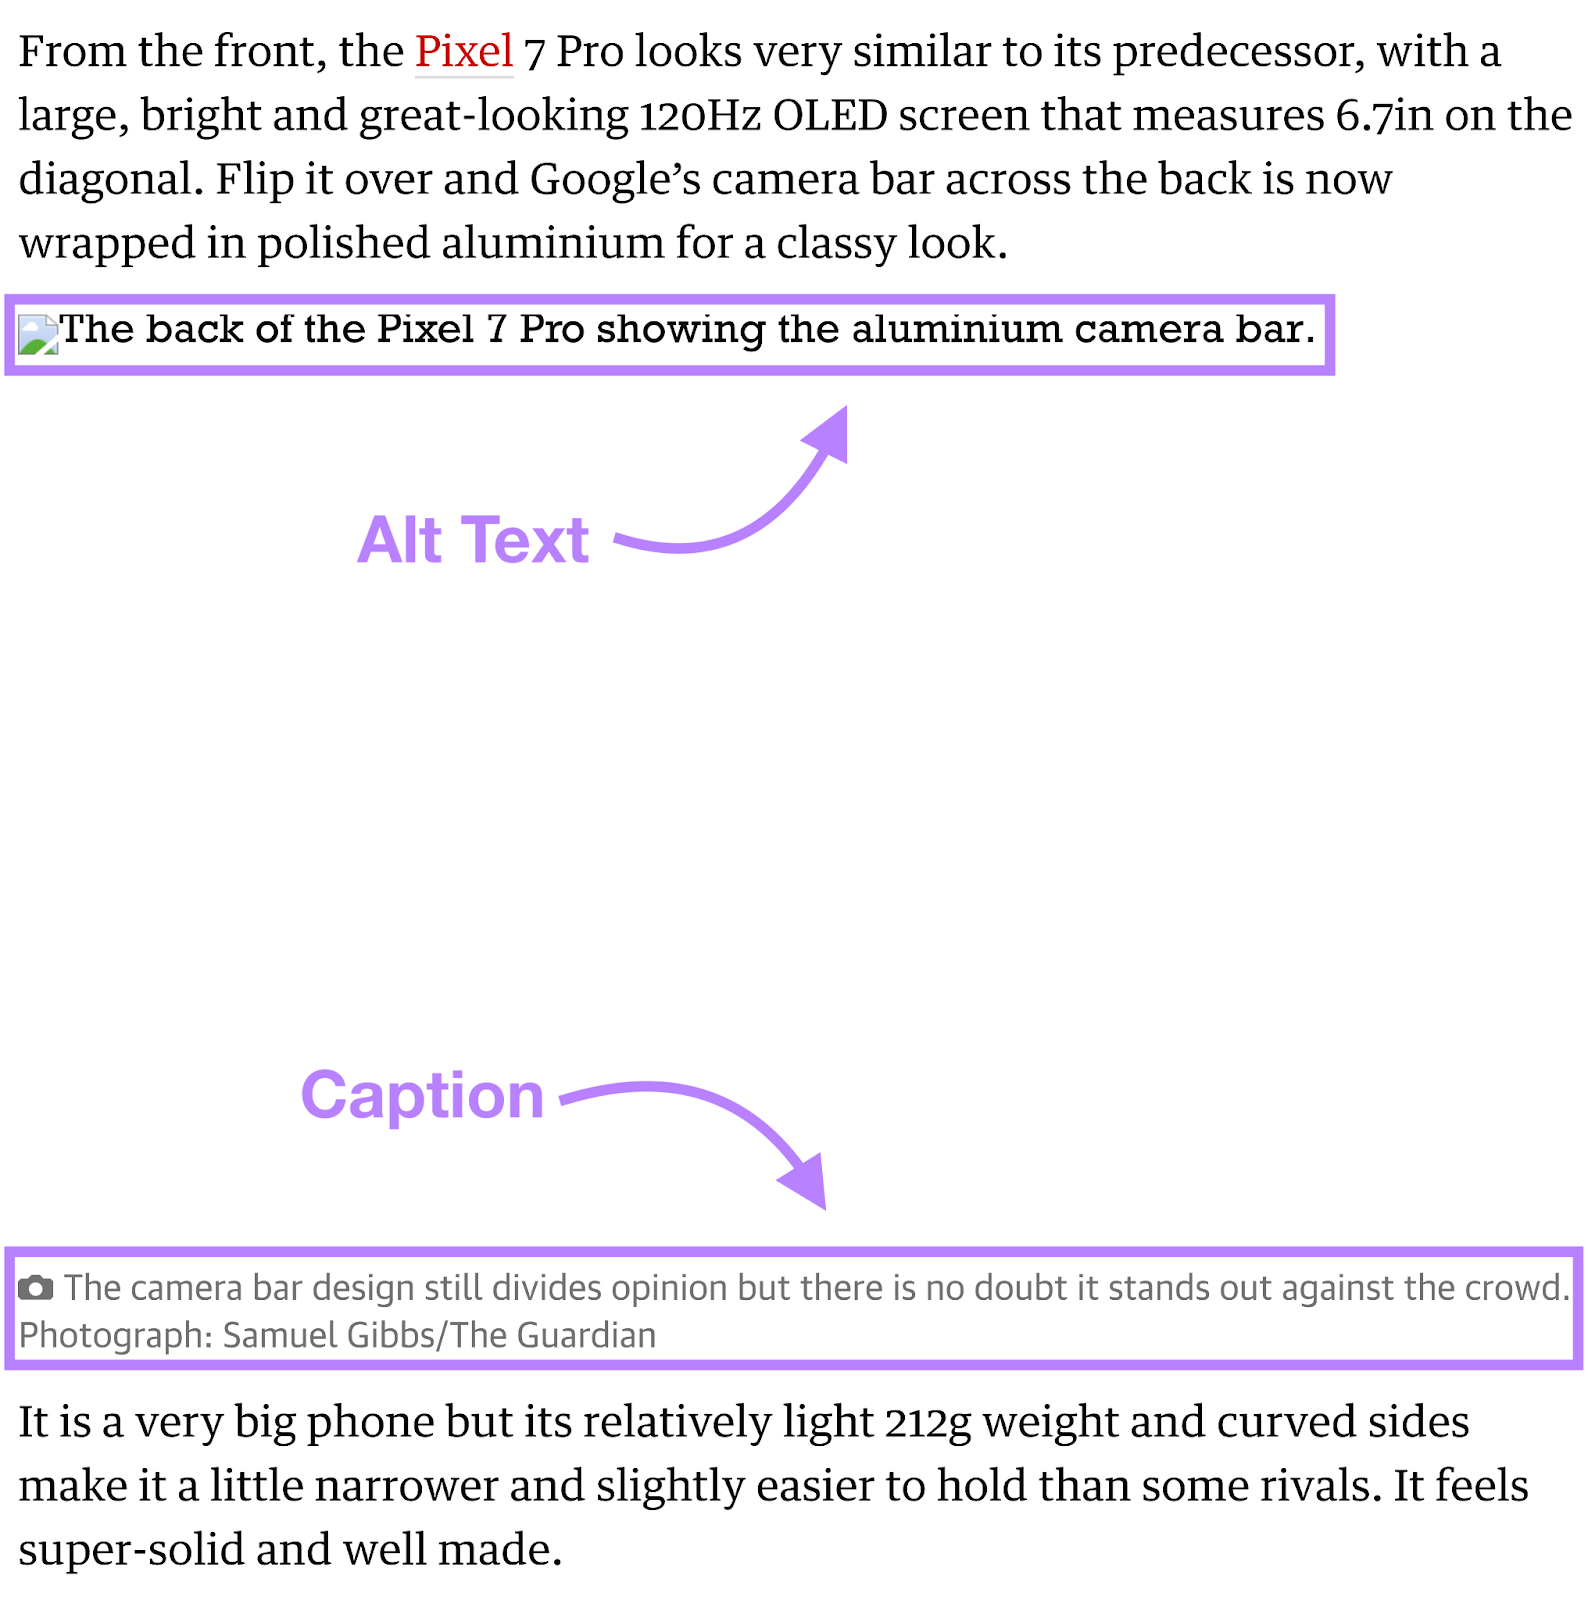 A section of an article about the Pixel 7 Pro. Alt text appears in place of the image, and a caption appears below.